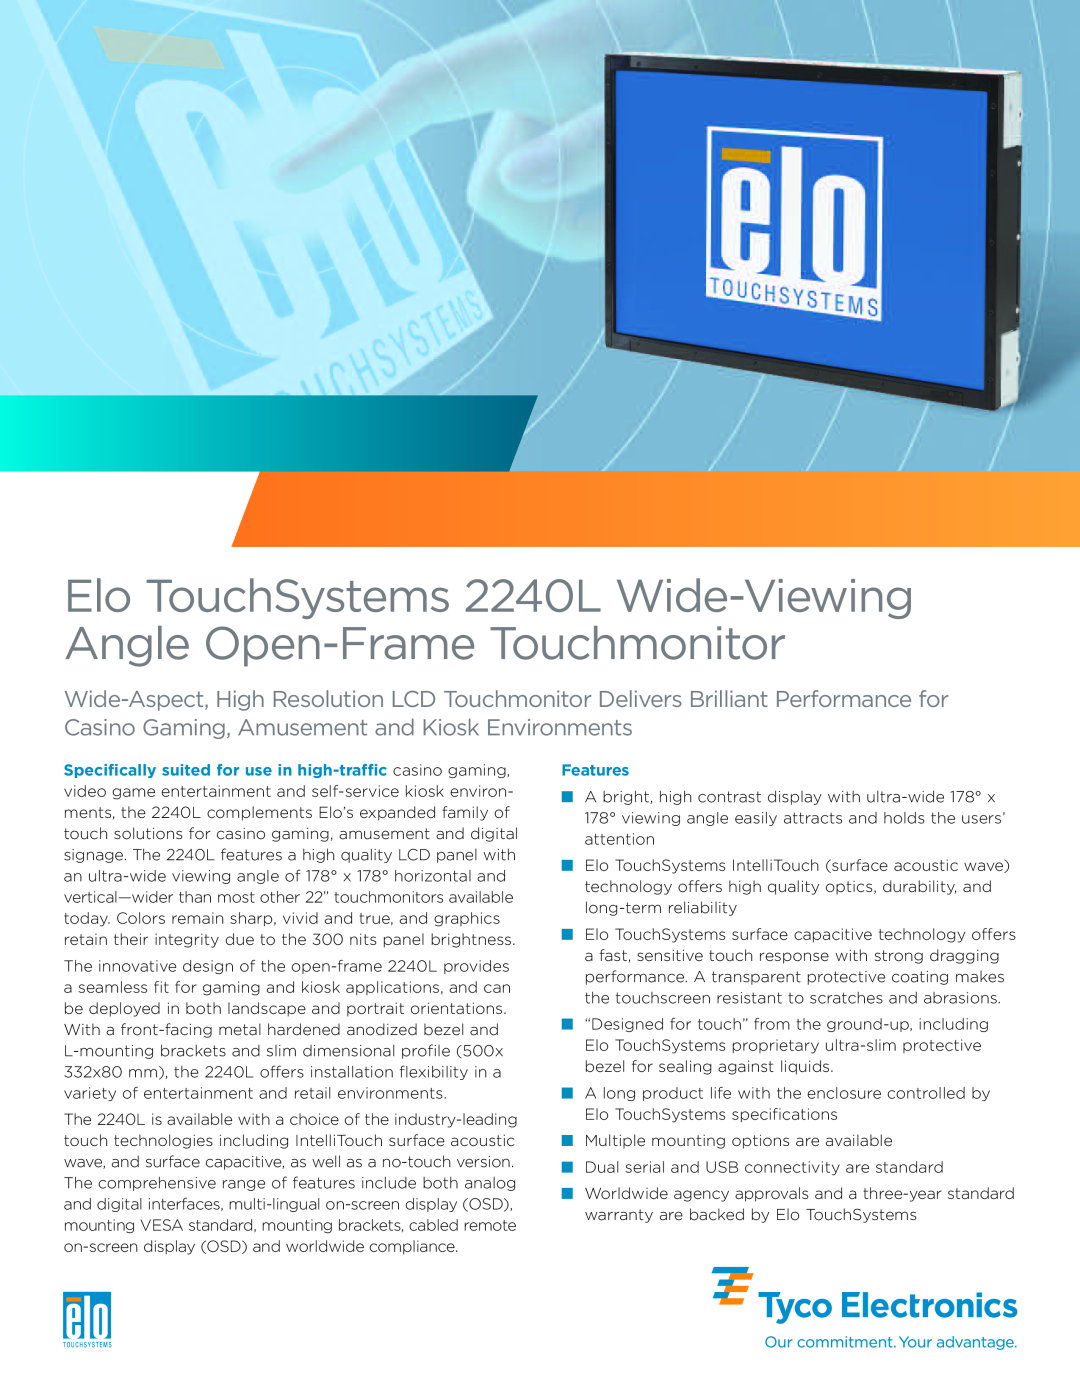 Tyco Electronics specifications Features, Elo TouchSystems2240LWide-Viewing AngleOpen-Frame Touchmonitor 